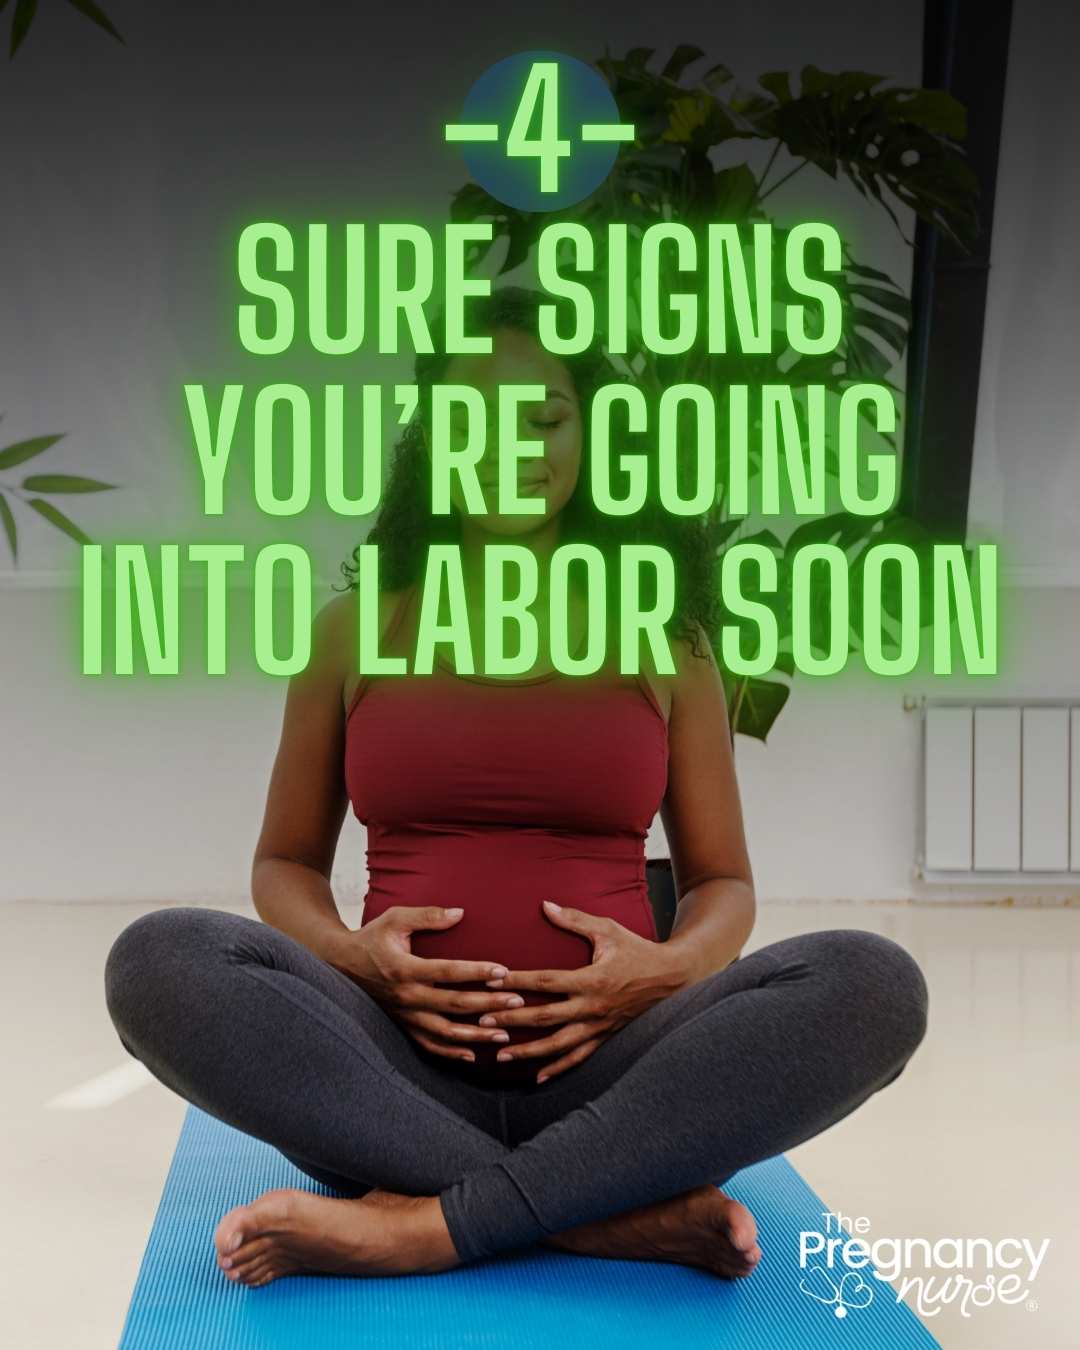 Curious about impending labor signs? Unravel the mystery of childbirth with "Anticipating Baby's Arrival: 4 Signs That Labor is Imminent". Gain insight into your body's secret cues assuring you're on the brink of meeting your little one. Knowledge is power, especially in motherhood's final stages. Let's demystify childbirth together!